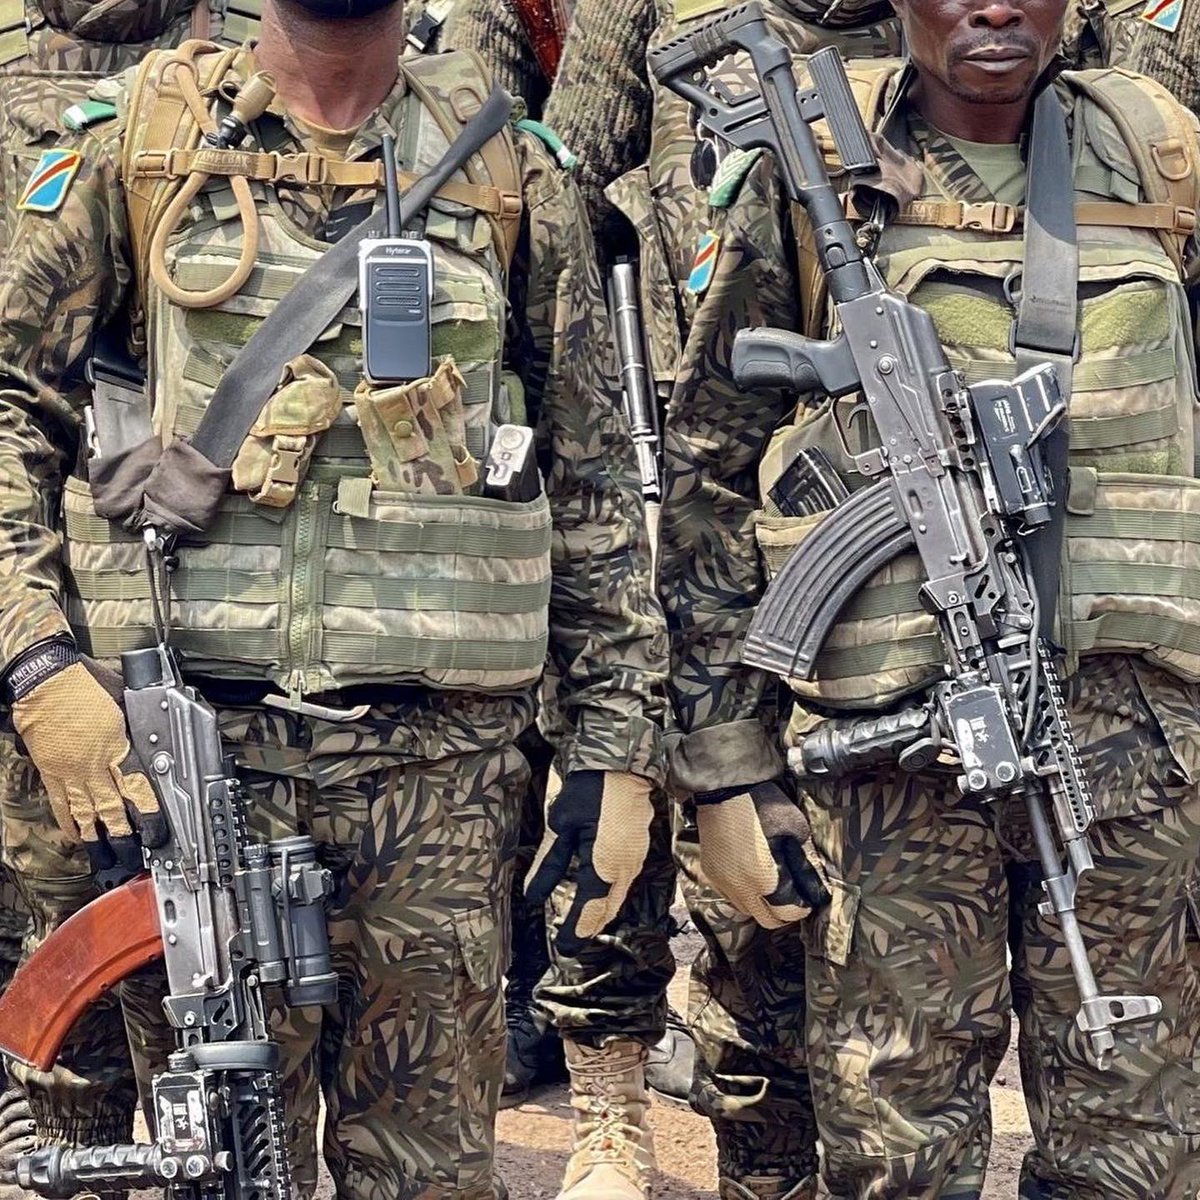 A rapid response force unit from the FARDC.🇨🇩

#fardc #congo #ponabendele🇨🇩 #military #africanmilitary #kongo #specialforces